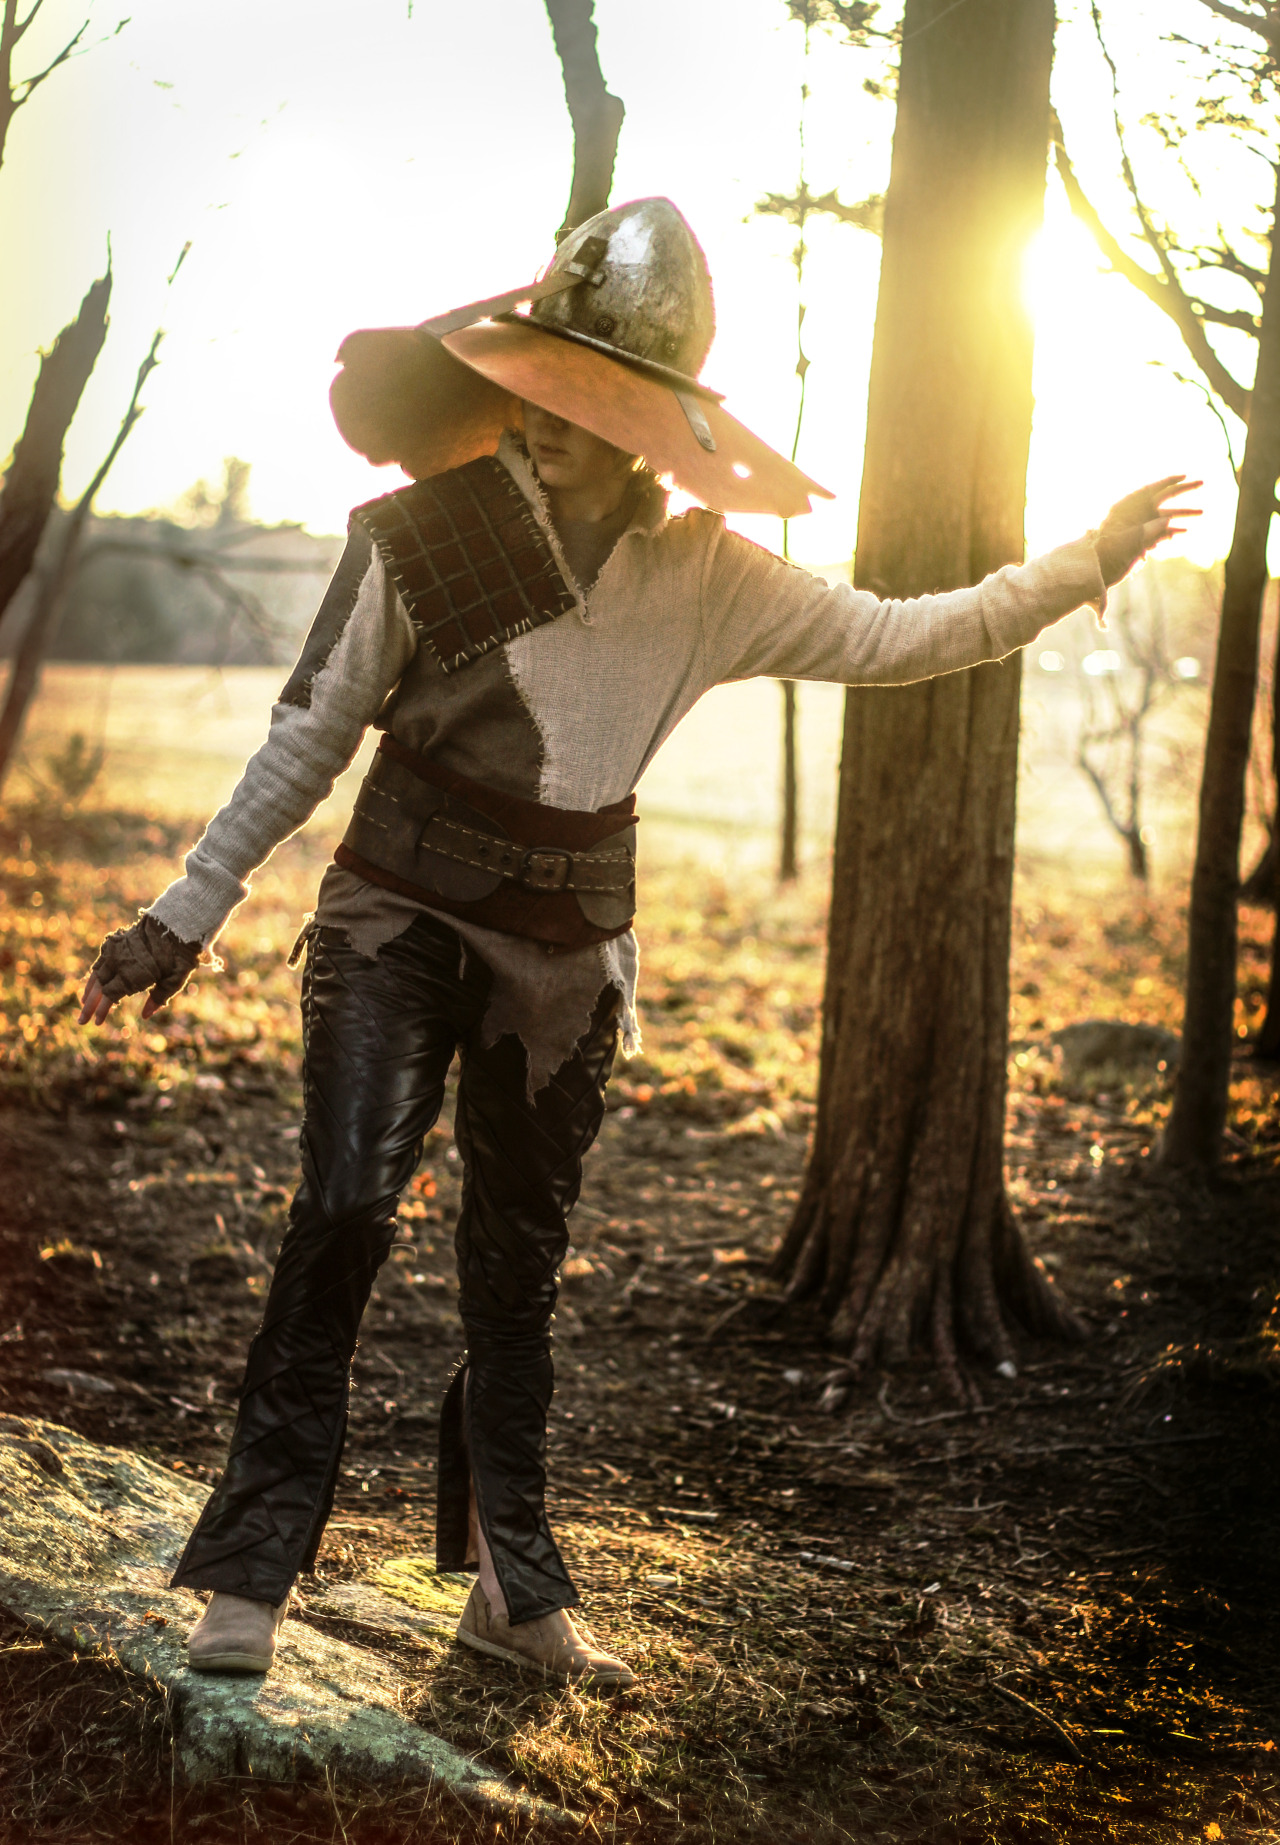 myrddin-emrys:  Just felt like posting another Cole photo from the shoot a while